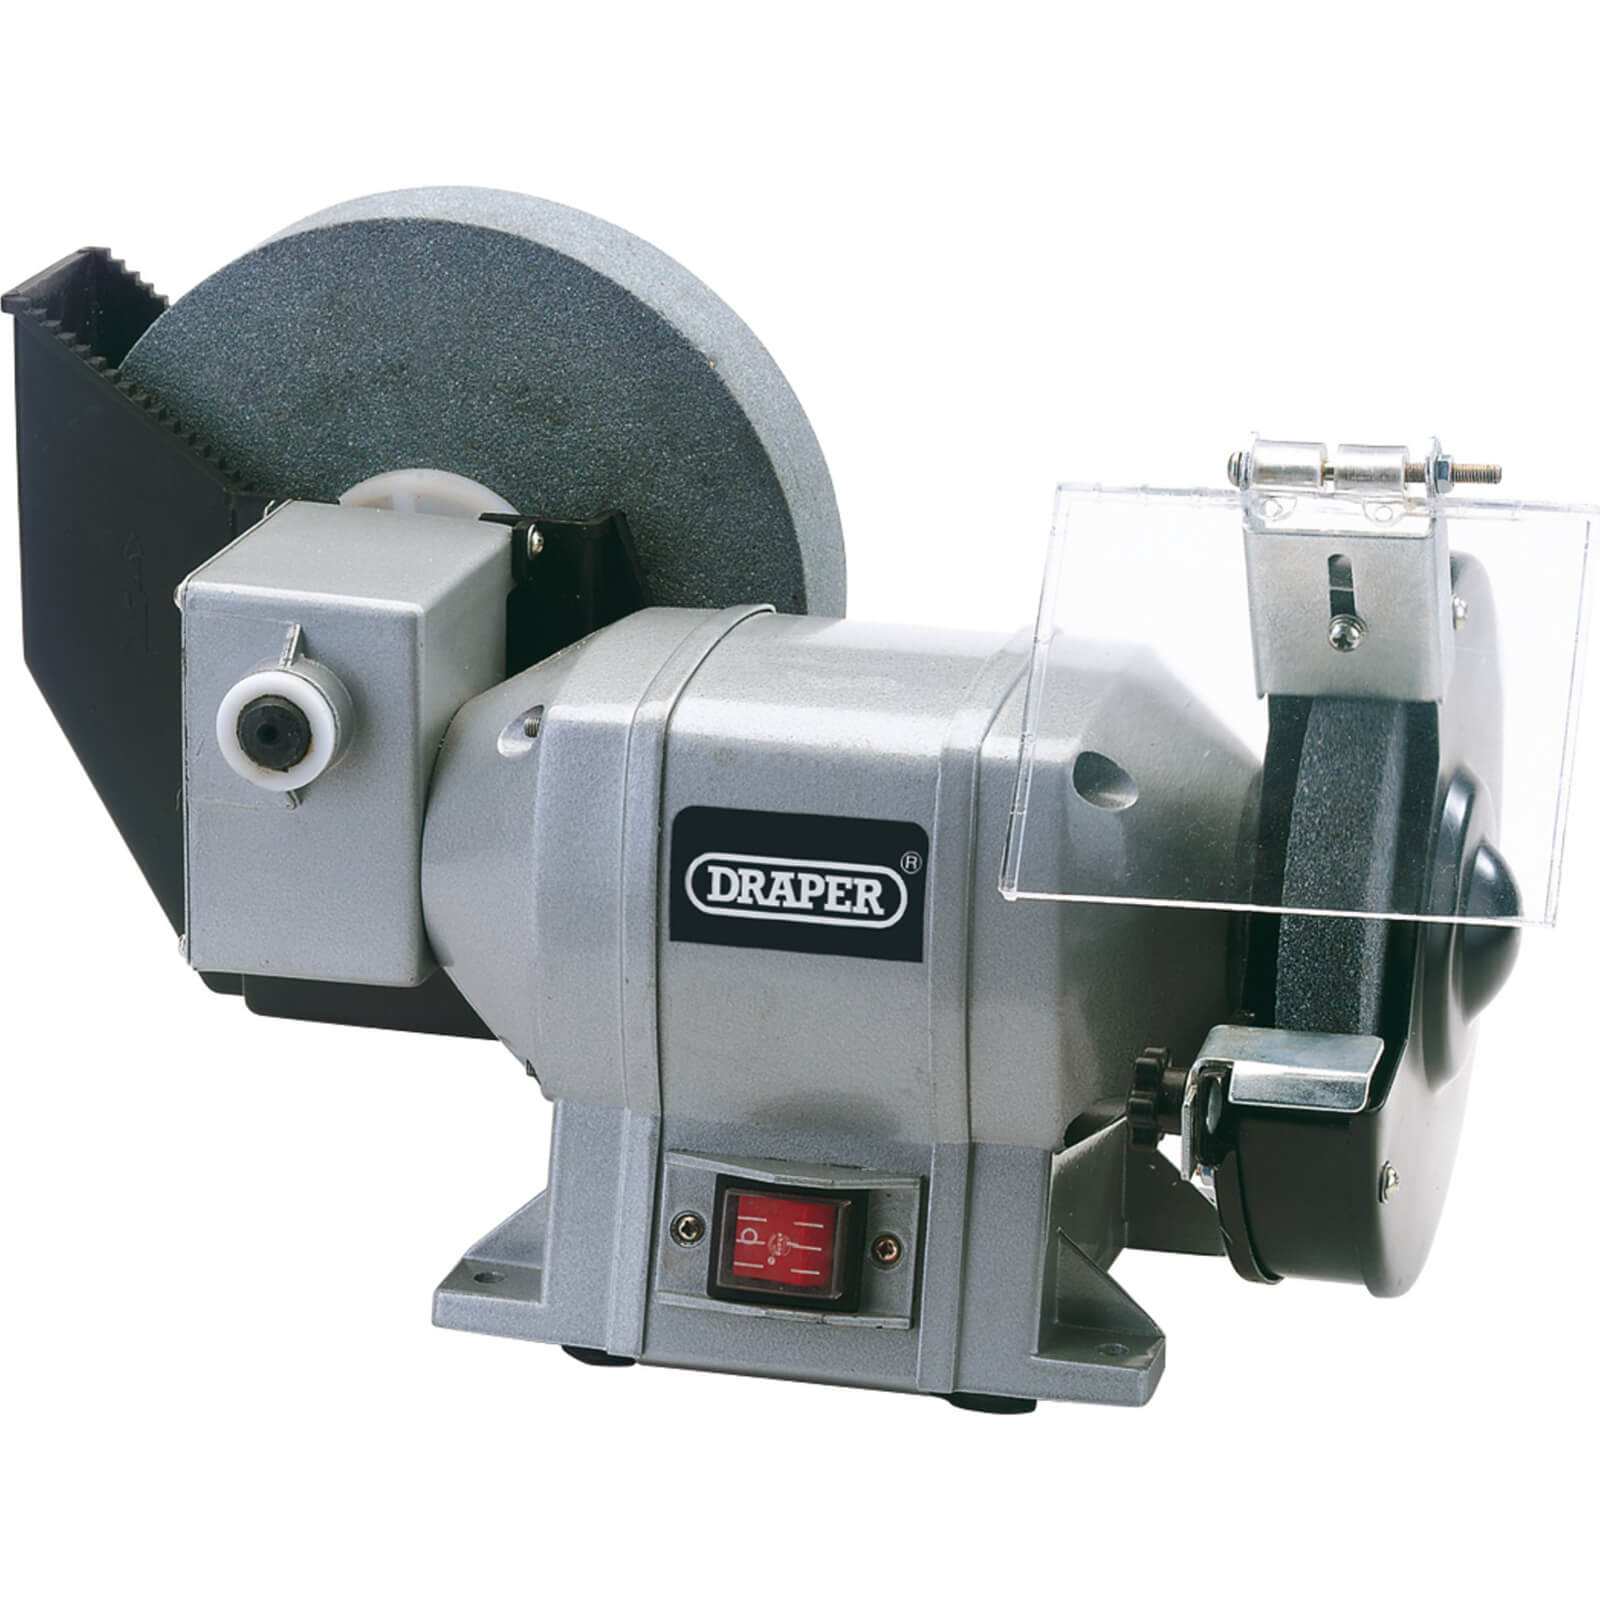 Image of Draper GWD200A Wet and Dry Bench Grinder 240v